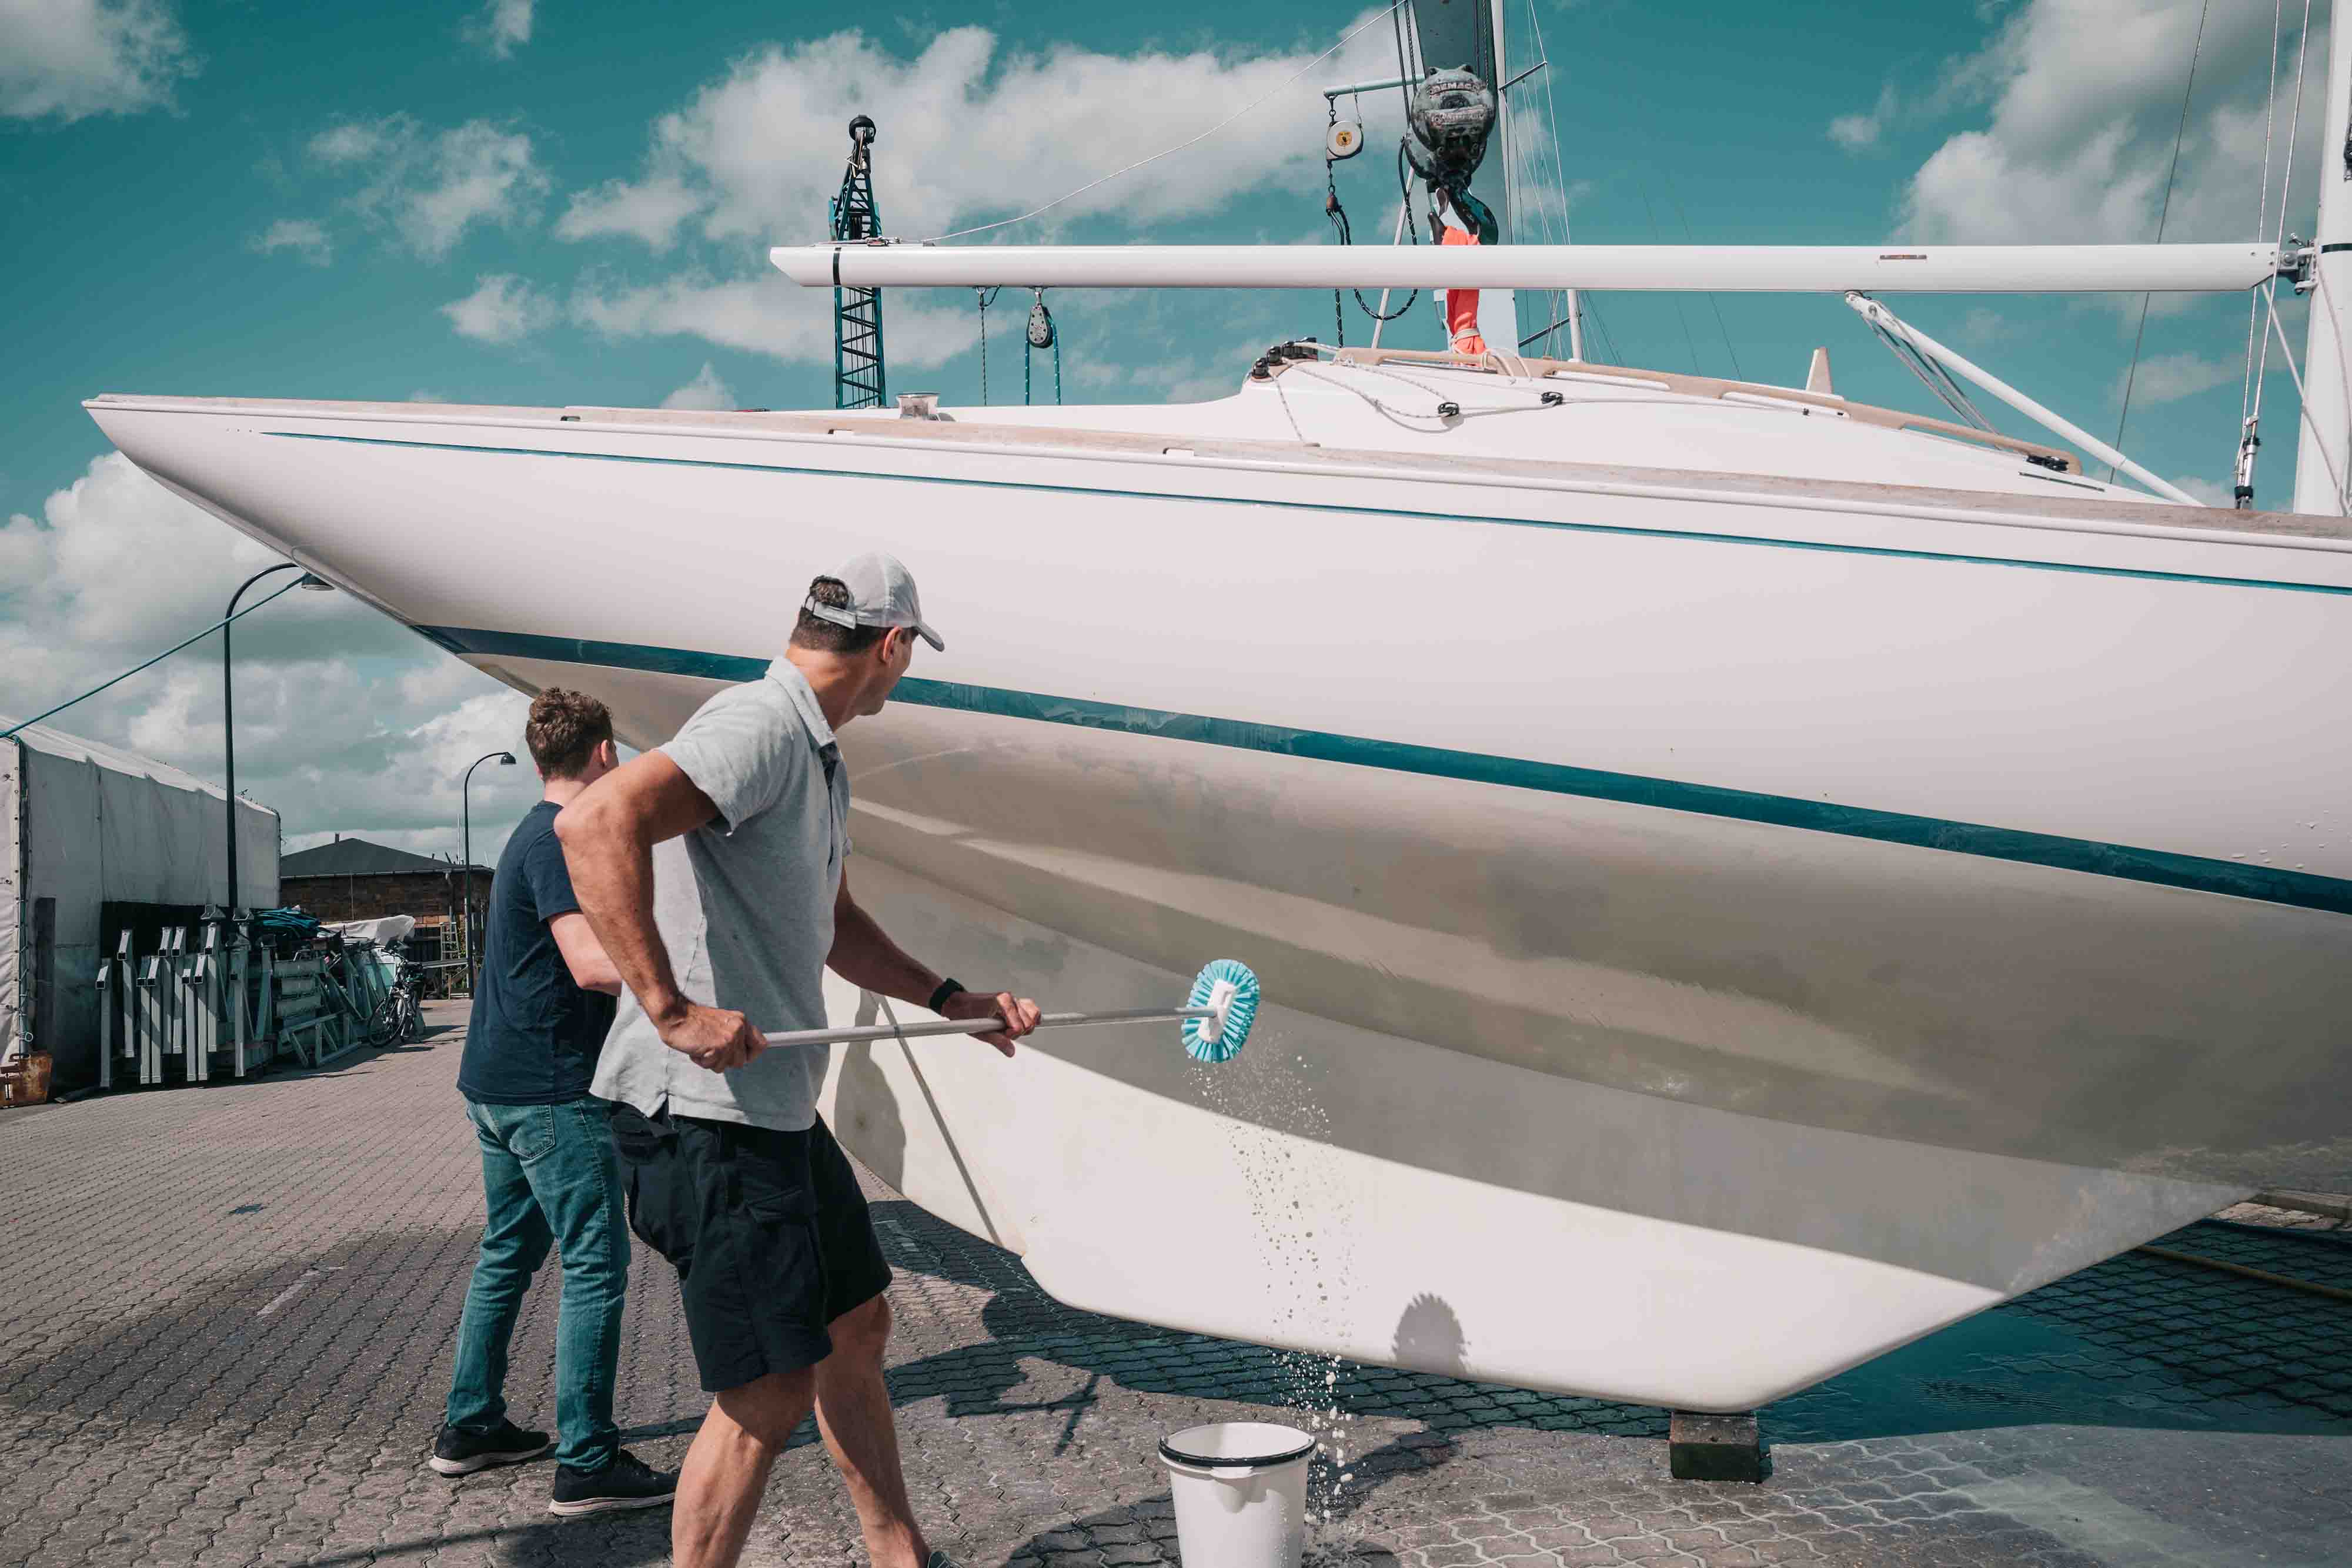 Father and son cleaning a sail boat together on a sunny day before they head out to sea